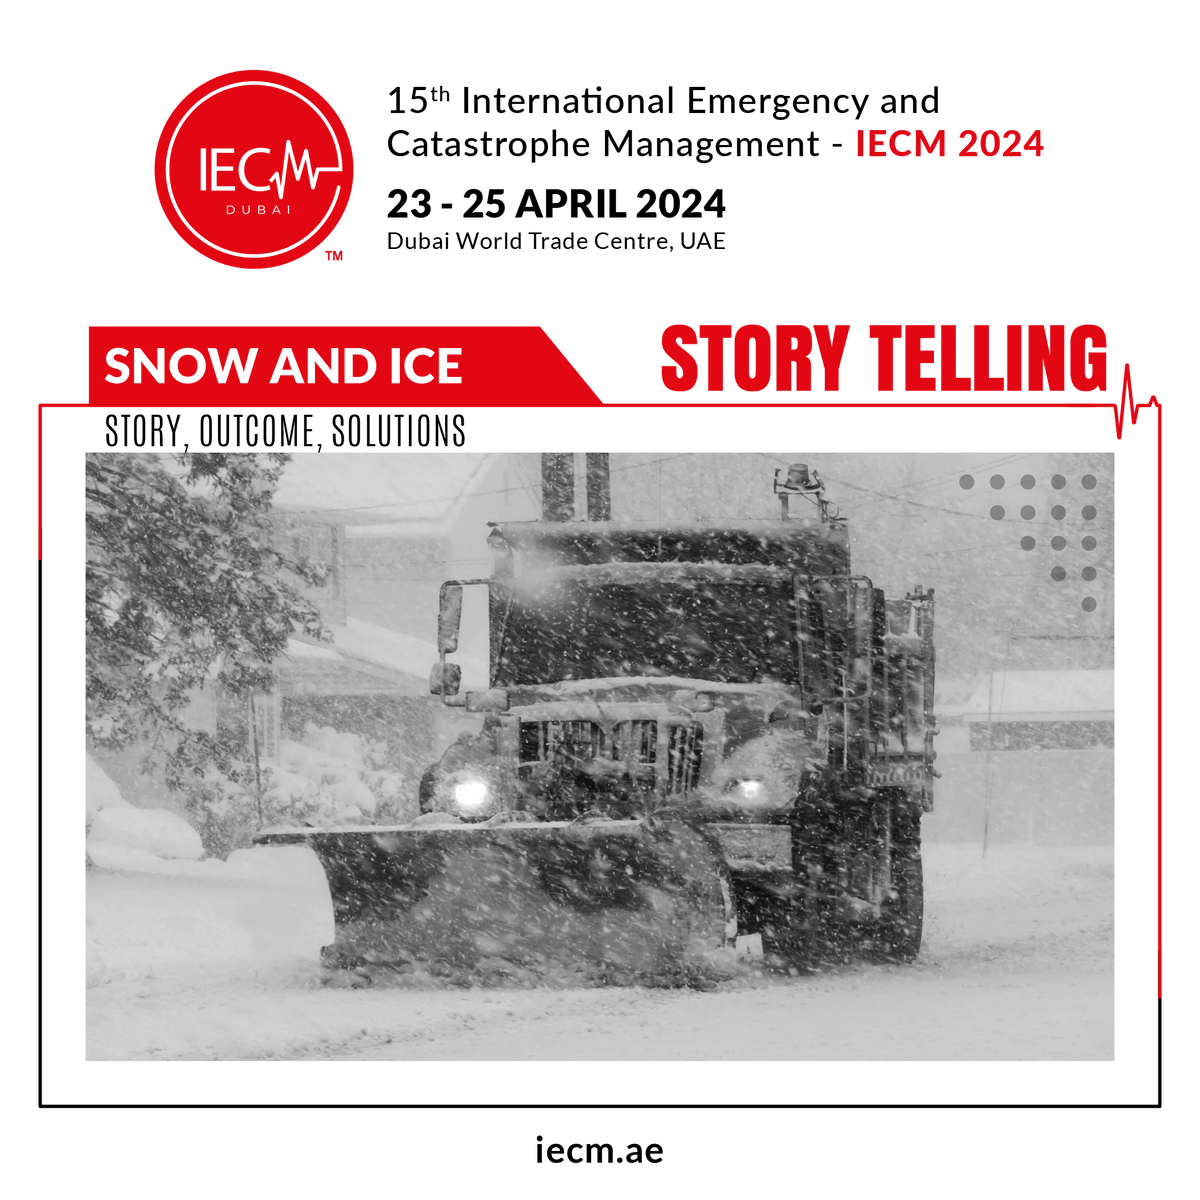 Storytelling at IECM, join the conversation at Dubai World Trade Centre from 23-25 April 2024. For more information visit iecm.ae or email at info@iecm.ae #Emergency #CatastropheManagement #Exhibition #AirSupportServices #AirportRapidResponse #AmbulanceServices